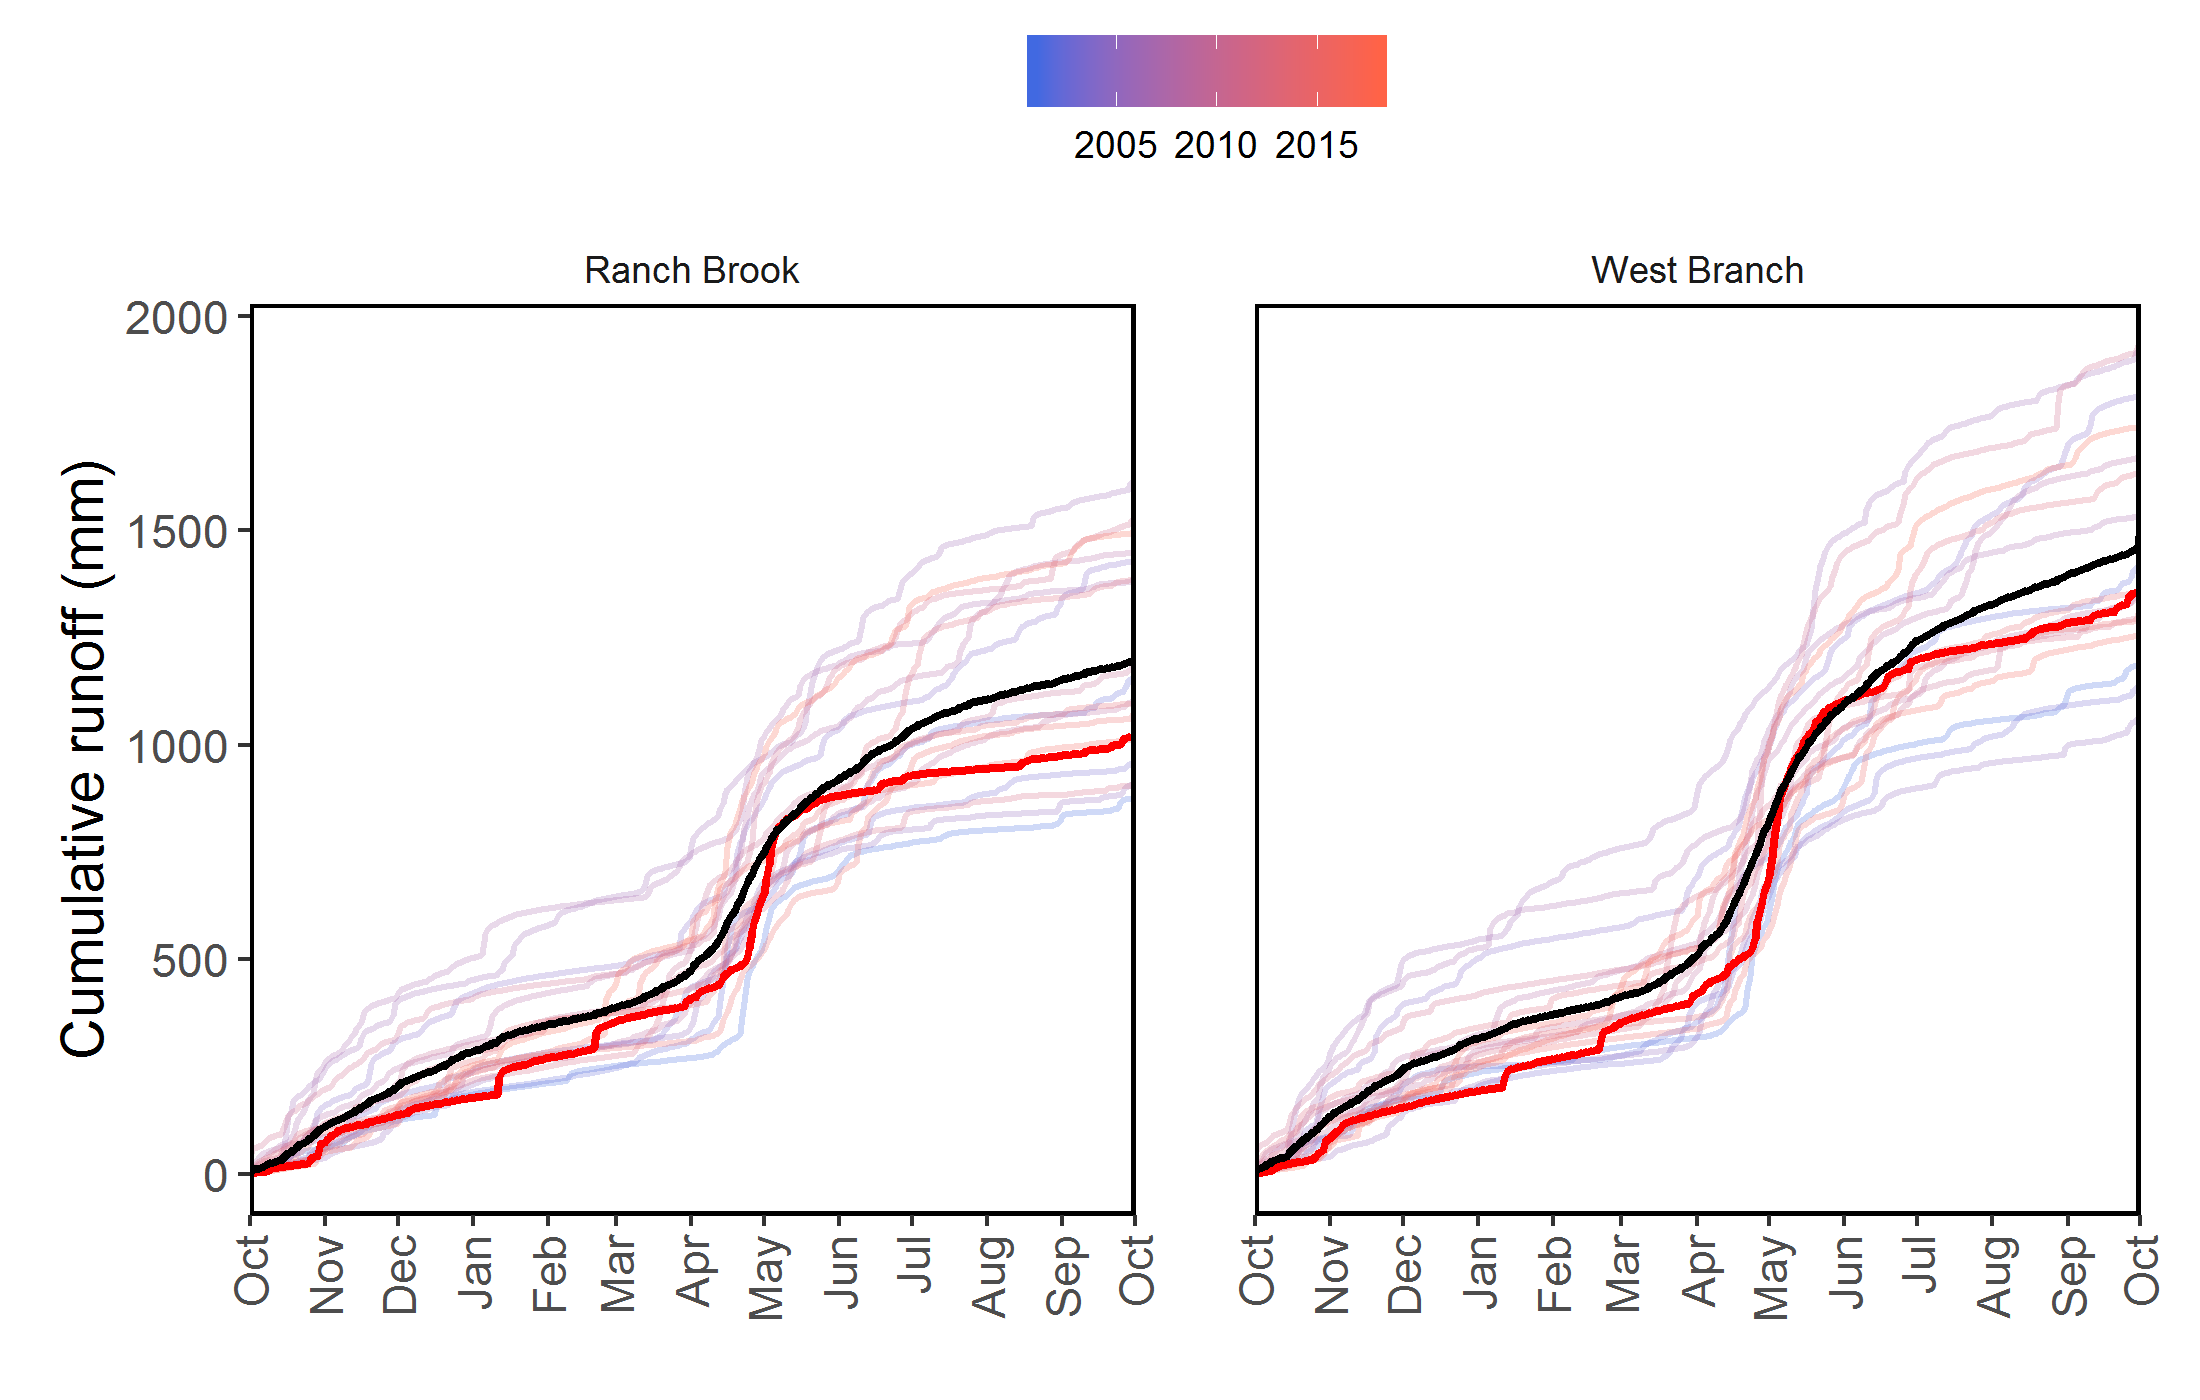 Figure 34. Cumulative runoff at Ranch Brook and West Branch based on the averages across the 18-year record (black line) and for Water Year 2018 only (red line). Faded lines show cumulative runoff for individual years (color denotes the year).